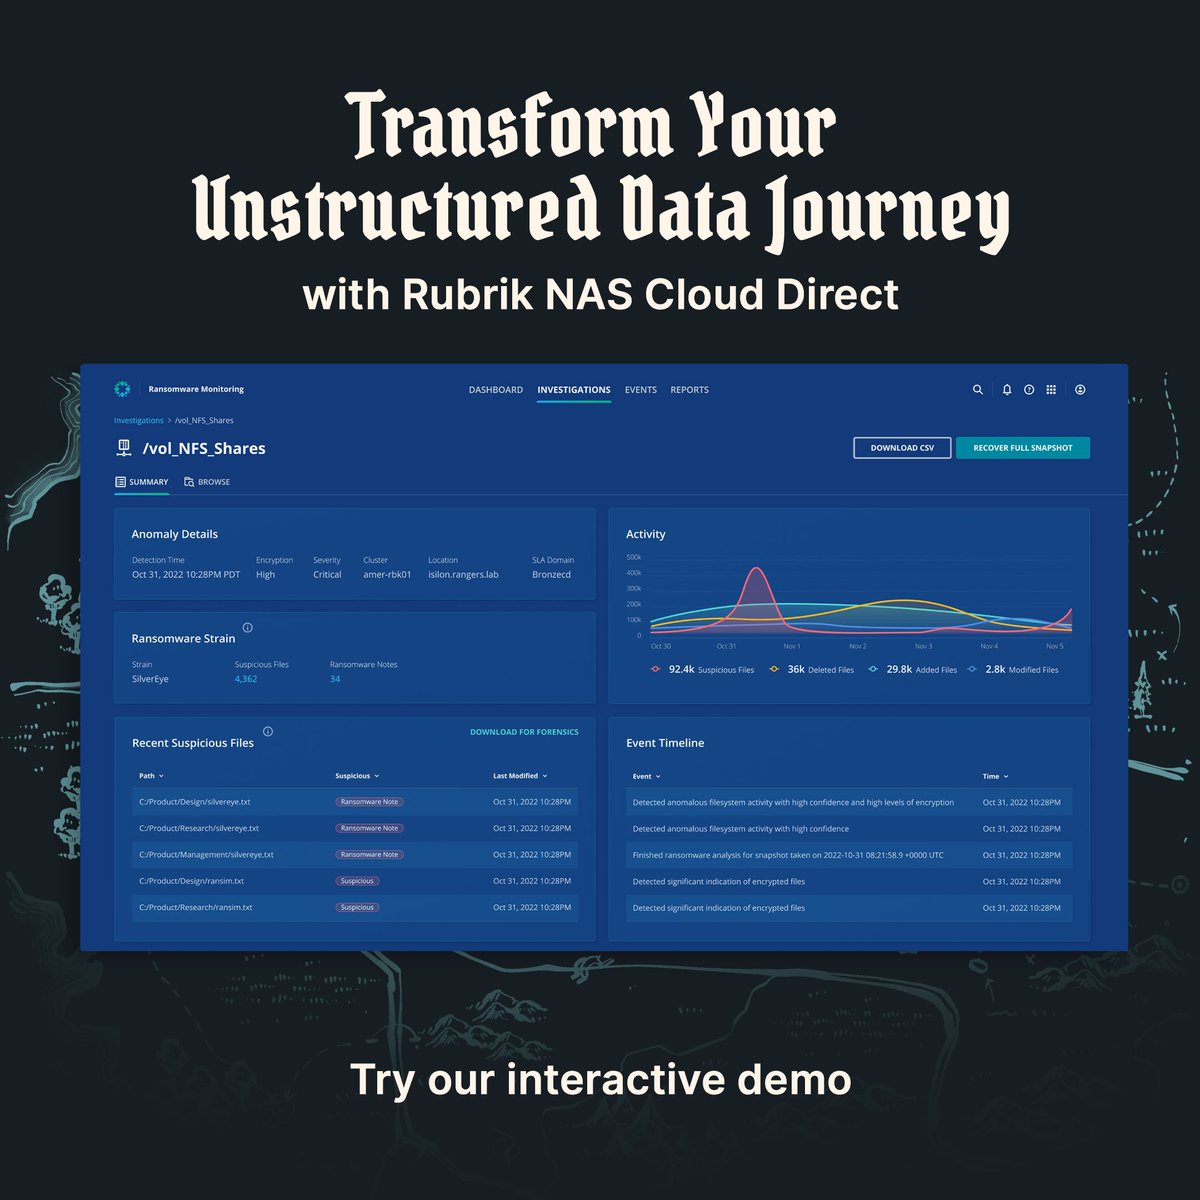 Ready to revolutionize your unstructured data protection strategy? Explore @RubrikInc’s NAS Cloud Direct interactive demo and see how easy it is to protect and manage your unstructured data. It's time to elevate your data protection game: rbrk.co/4byPYPy